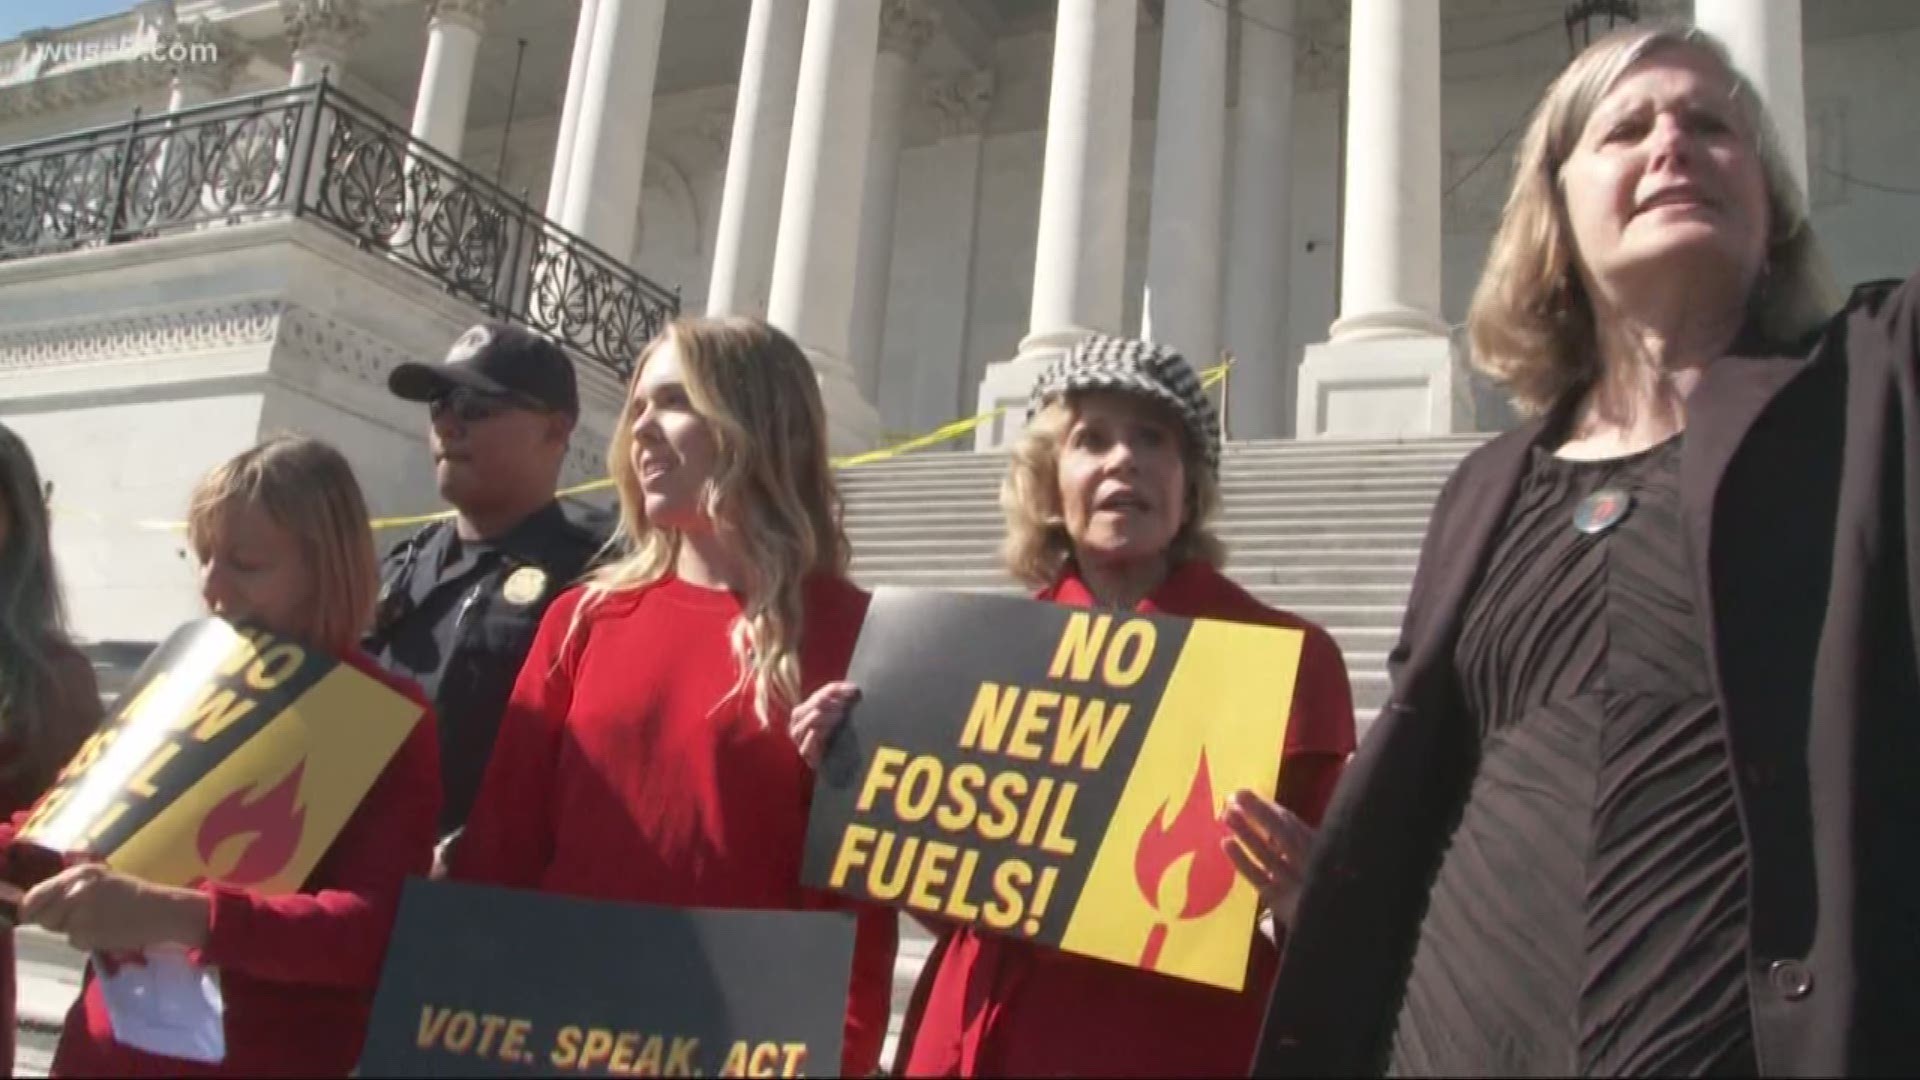 The nearly 82-year-old actress moved to D.C. to take part in the fight against climate change. Fonda among 16 people arrested, police say.